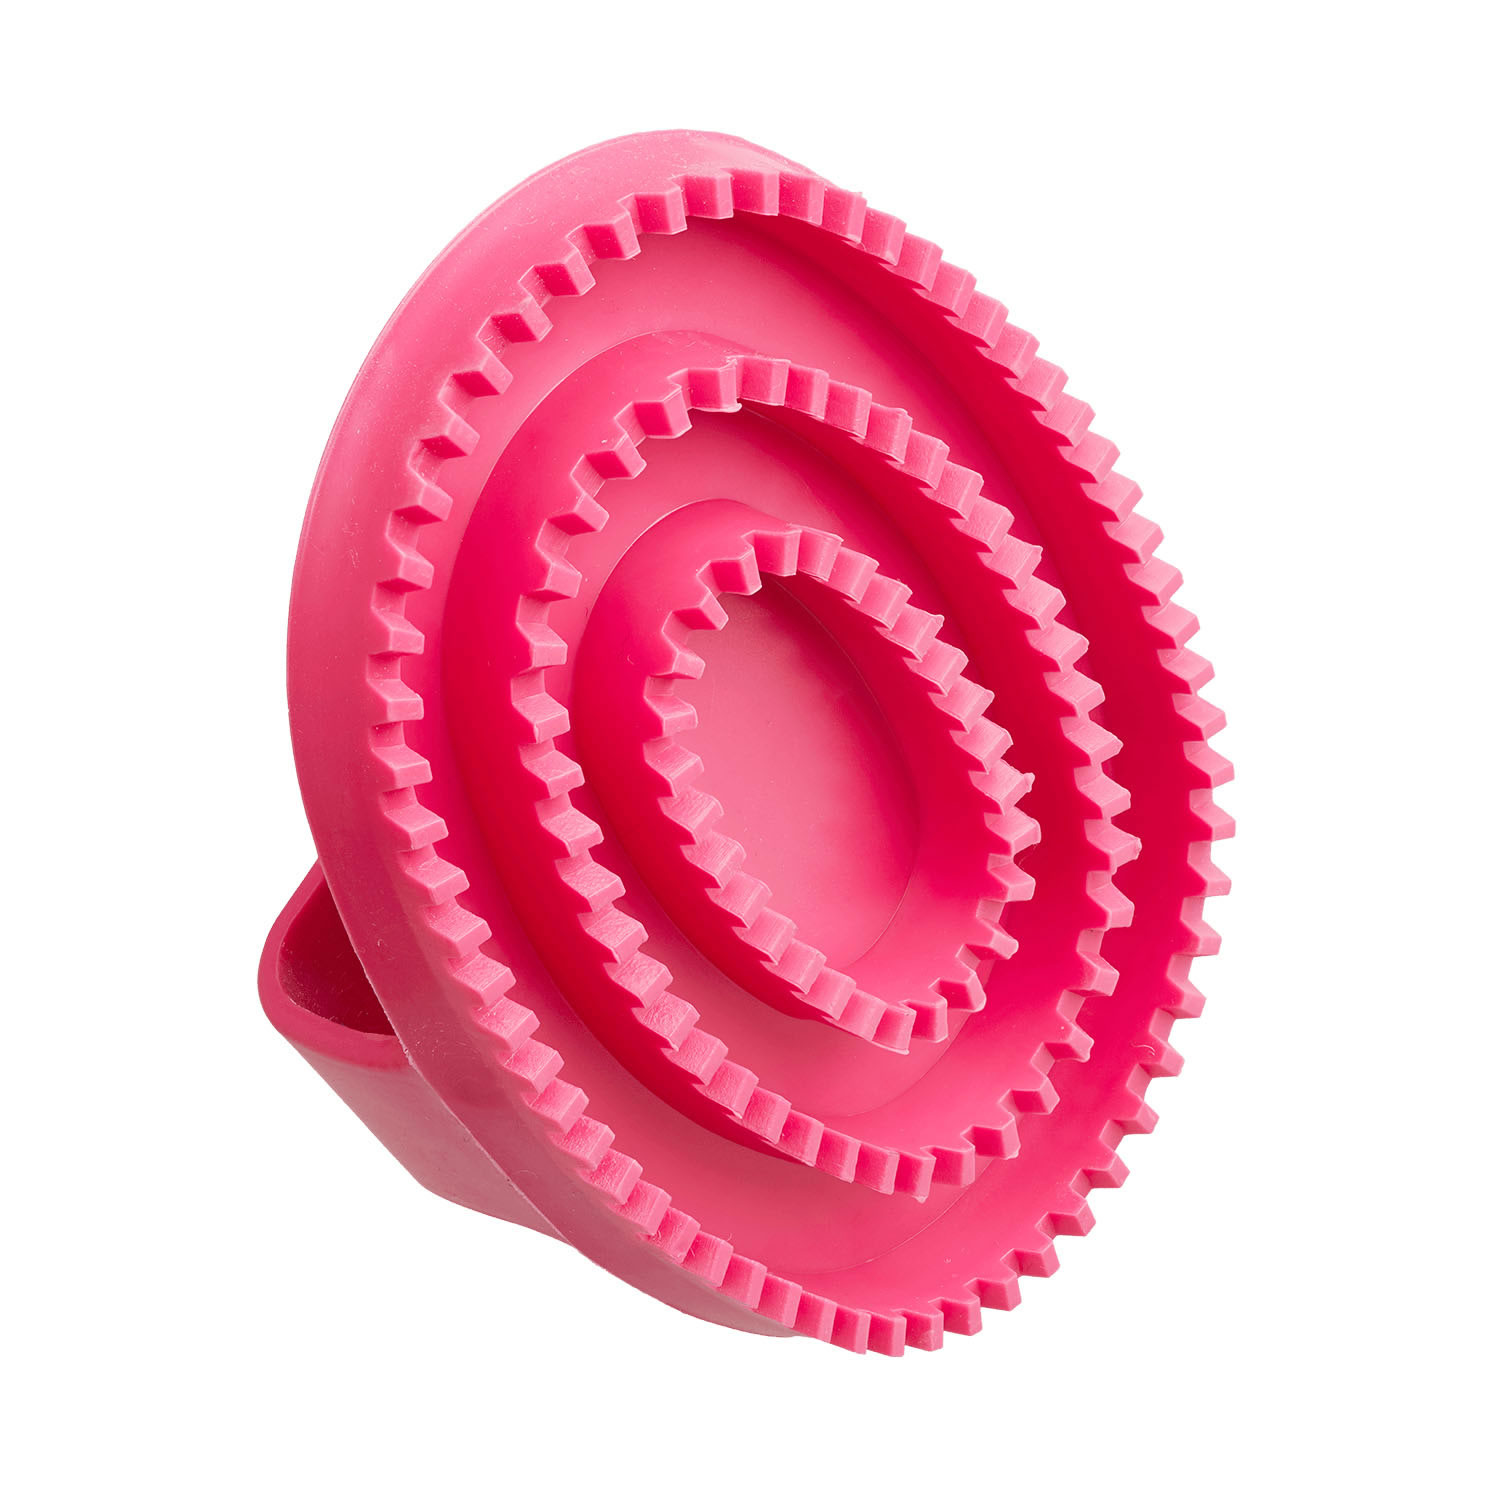 BITZ CURRY COMB RUBBER LARGE PINK LARGE